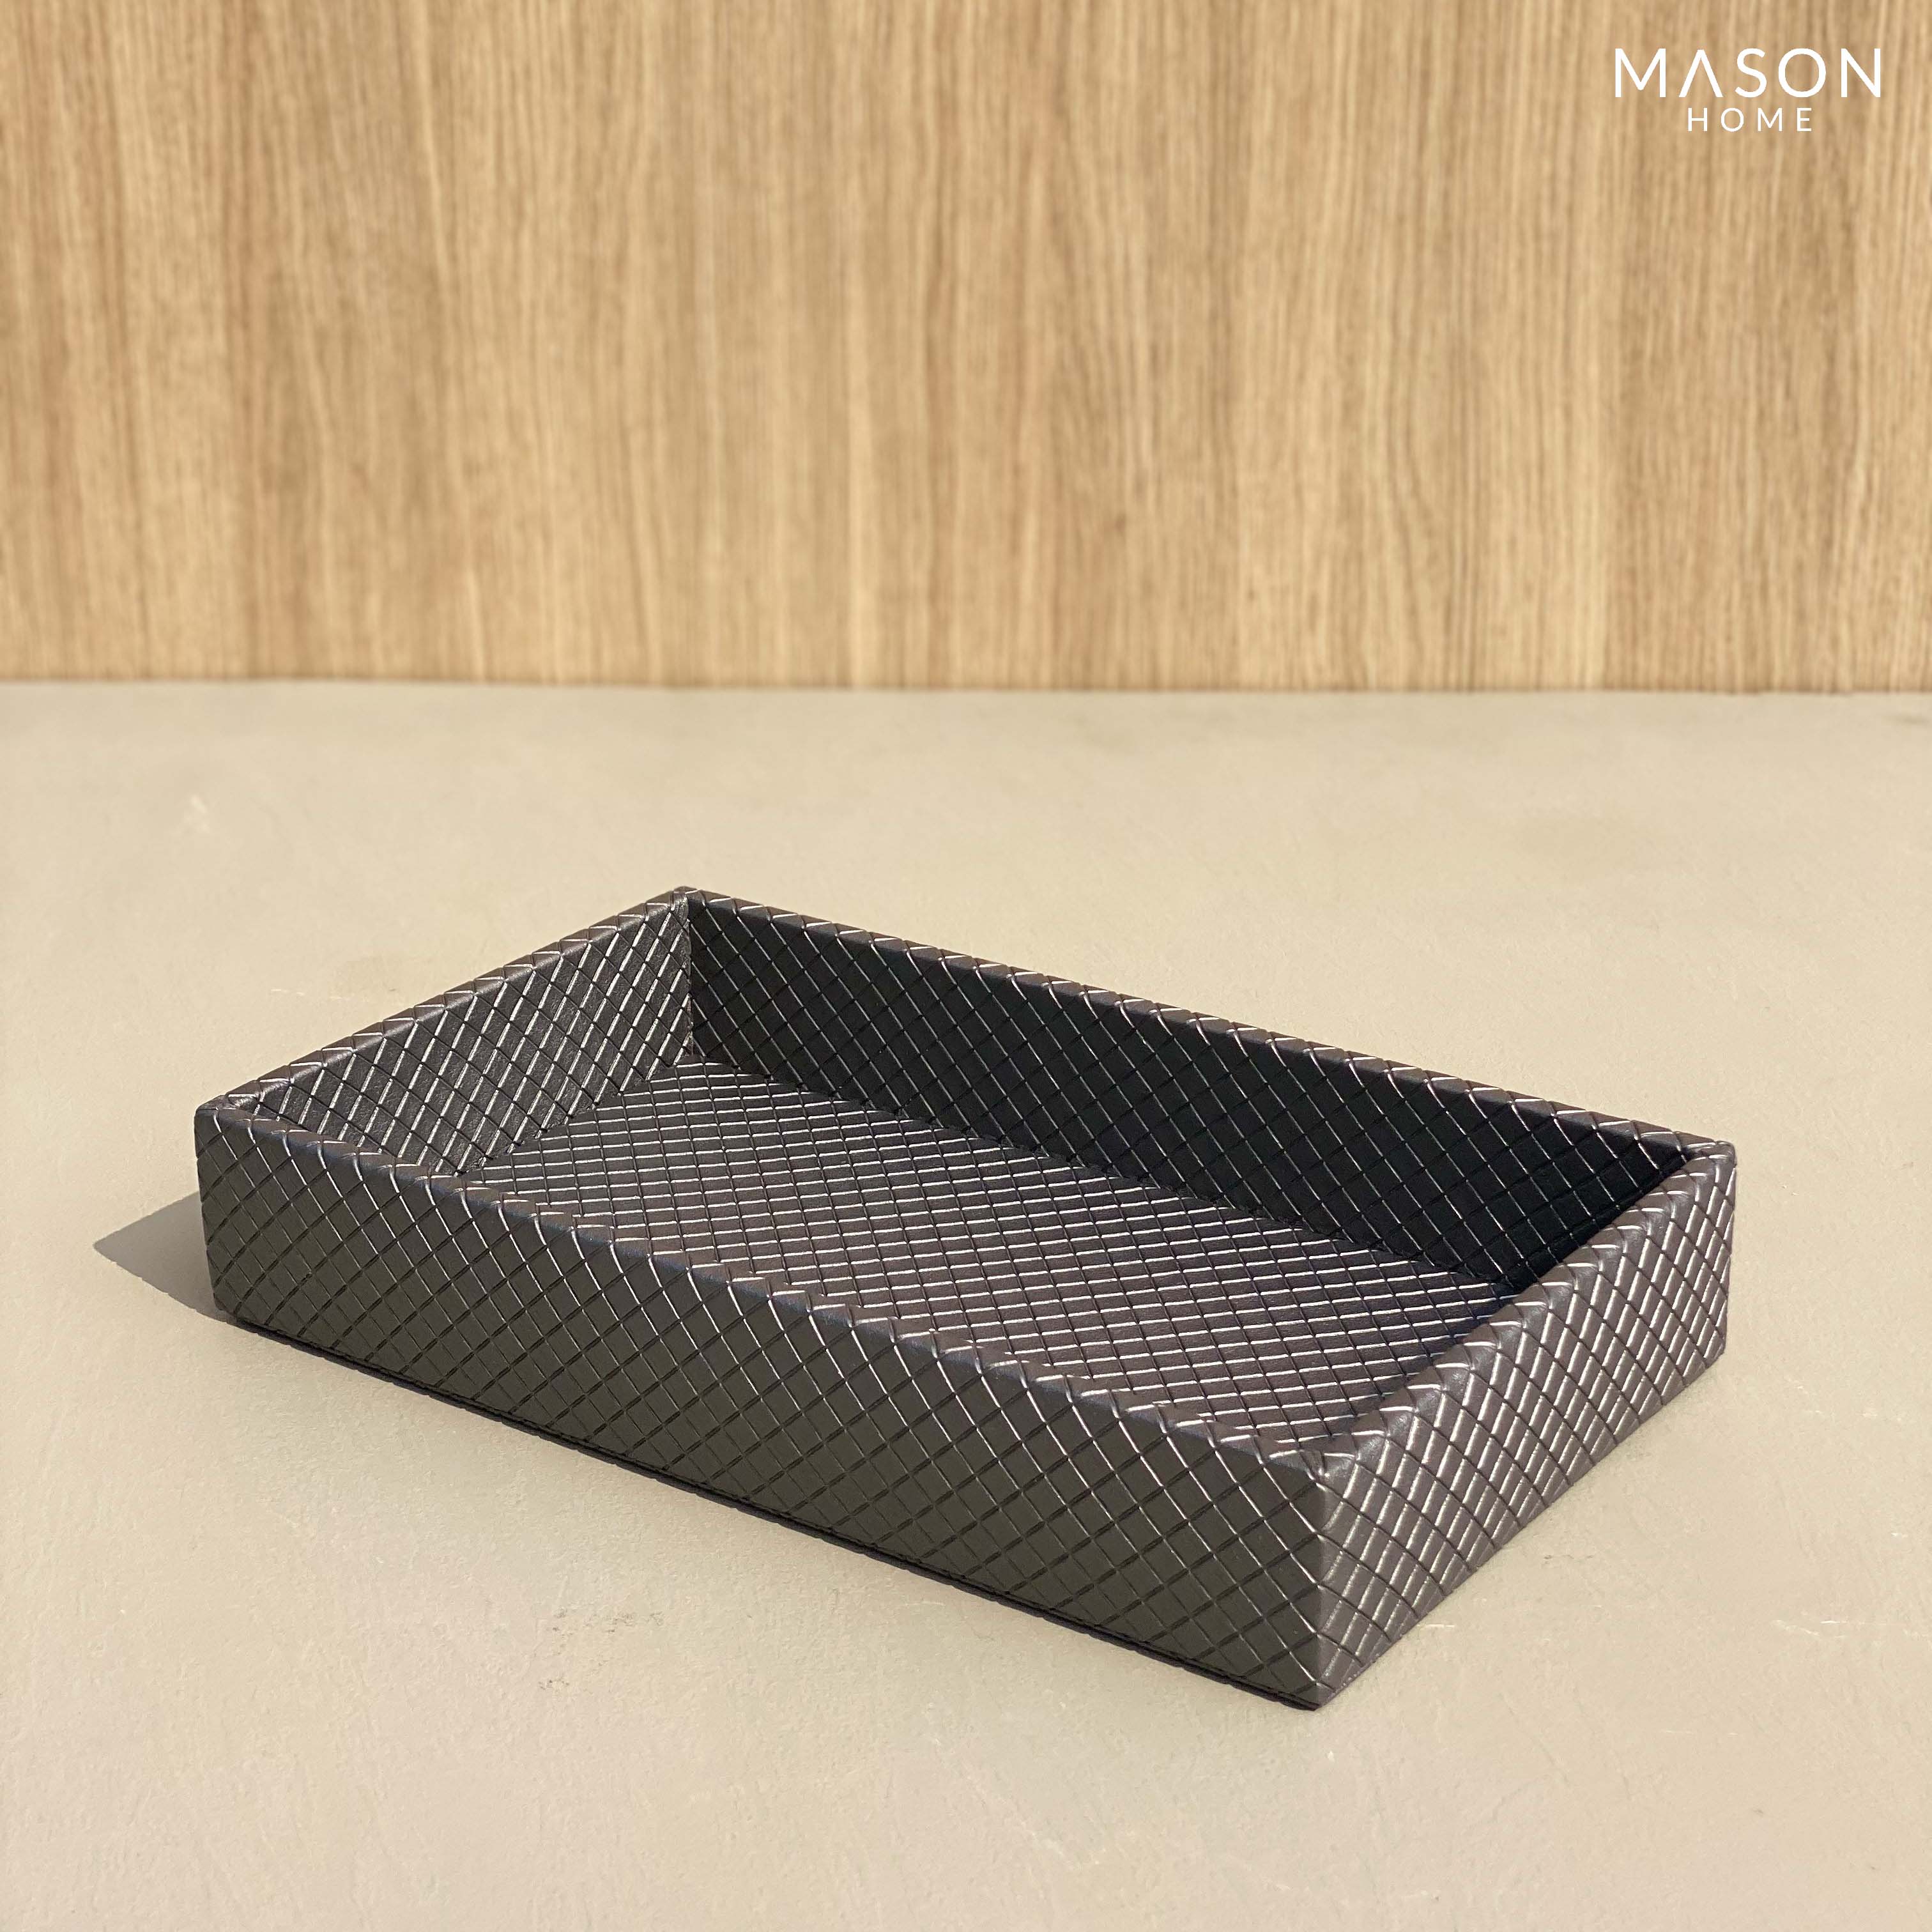 Buy braided napkin holder for table online-grey – Mason Home by